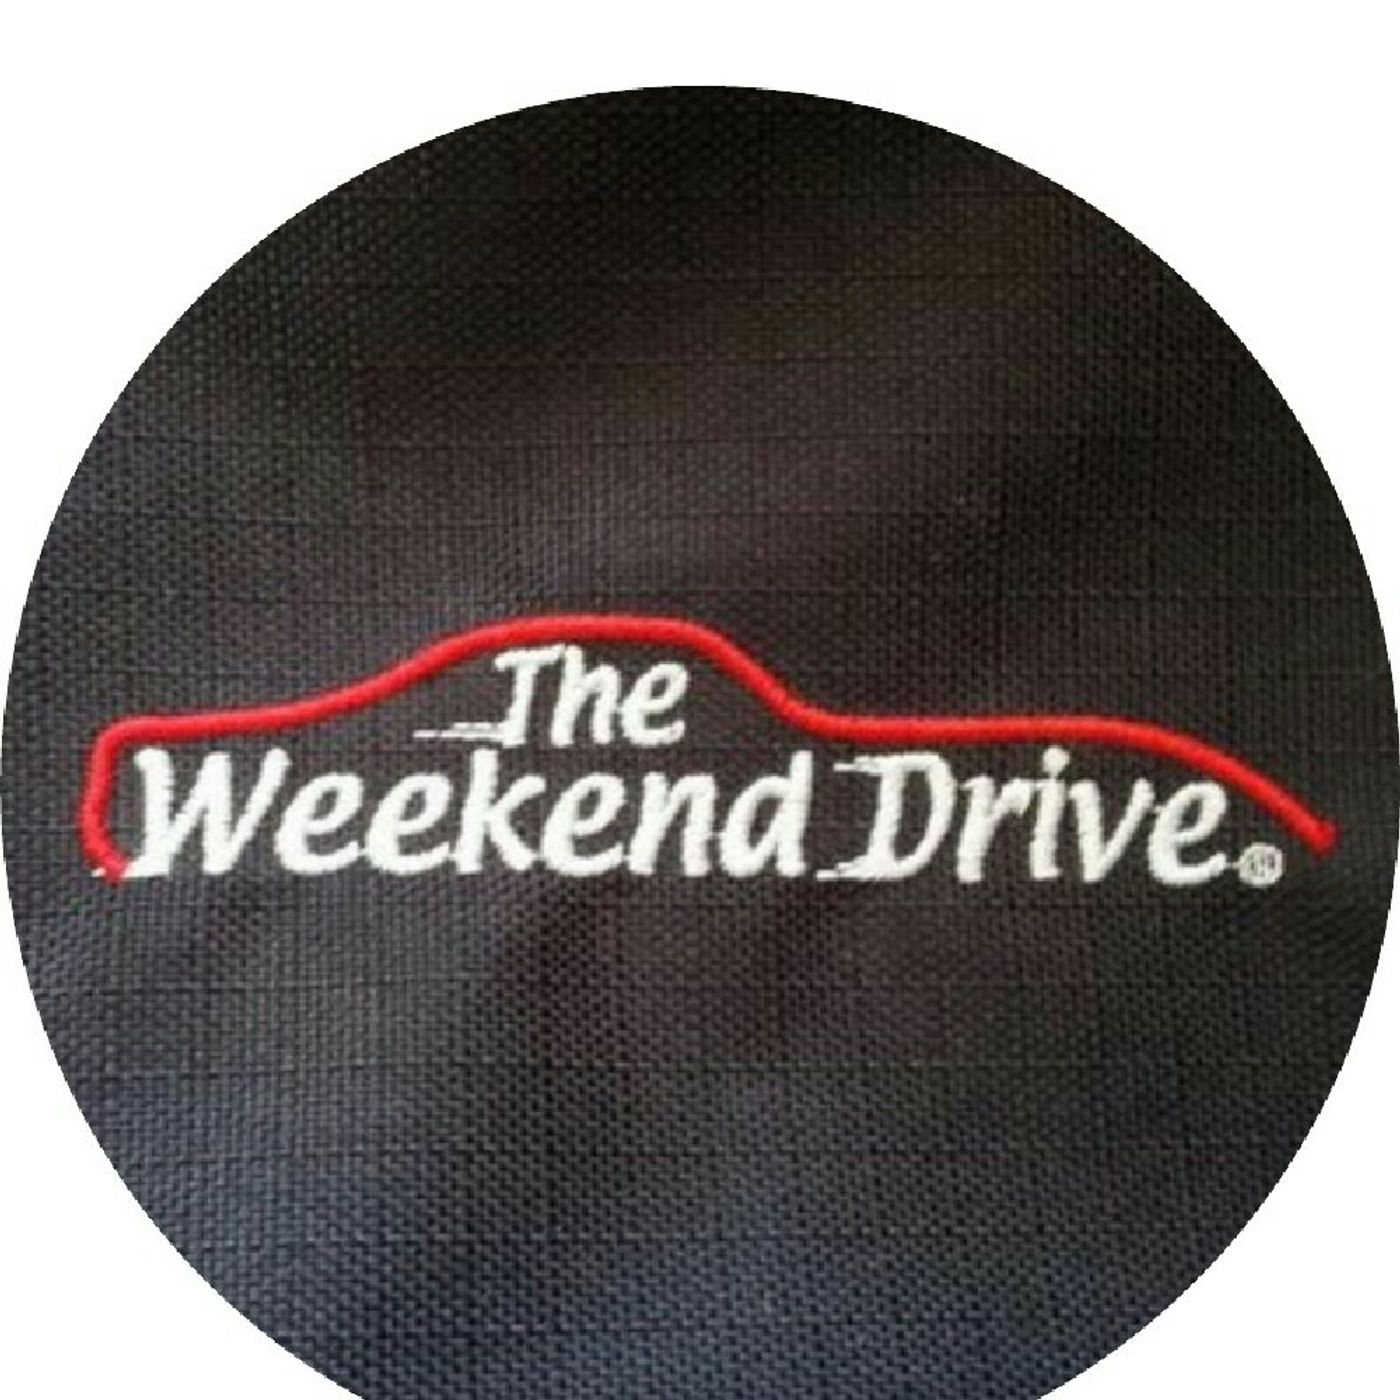 The Weekend Drive